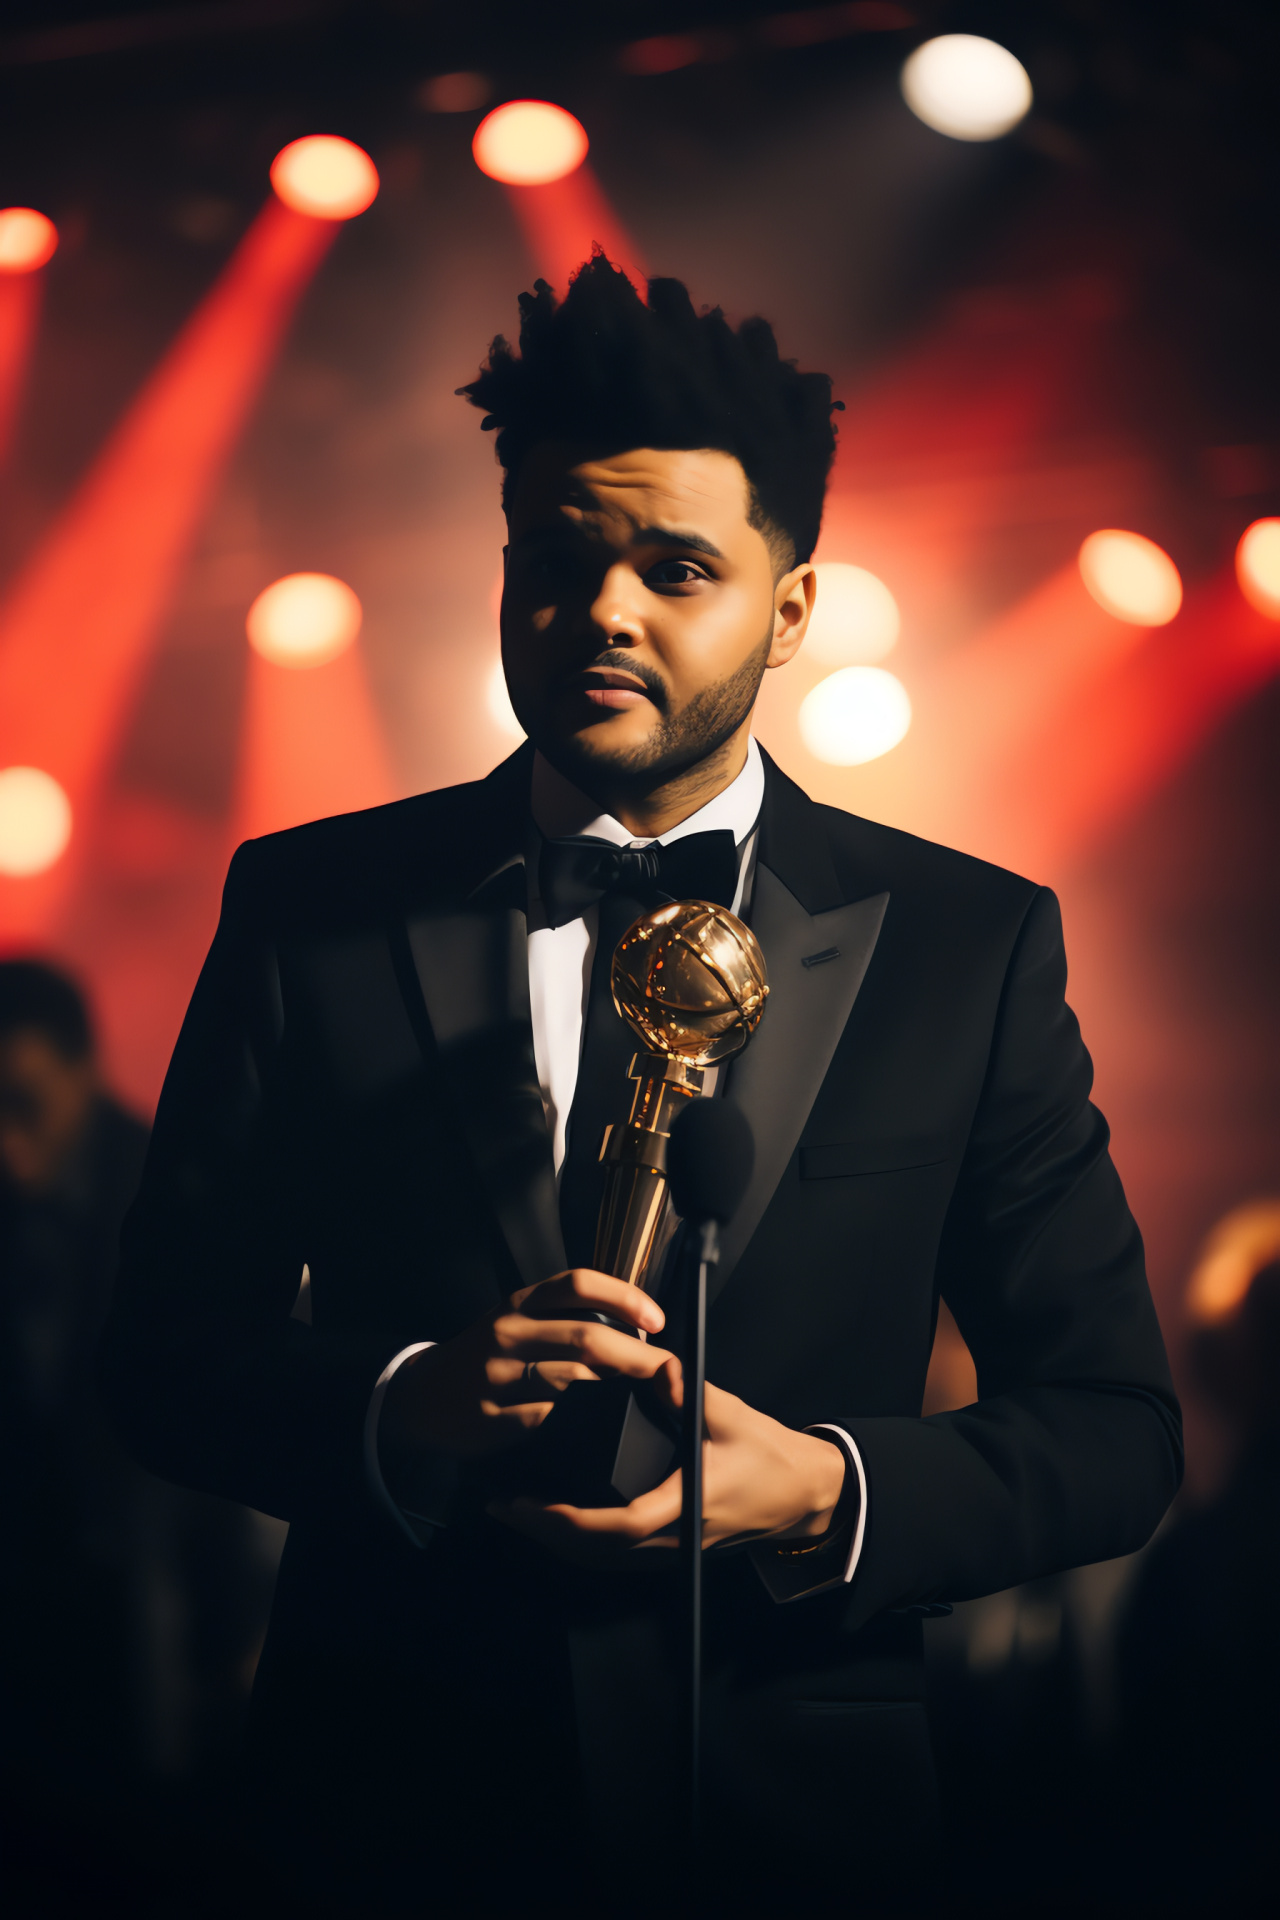 Musician The Weeknd, Recognizable hairstyle, Award event fashion, Vocal performer, Elegant evening wear, HD Phone Image